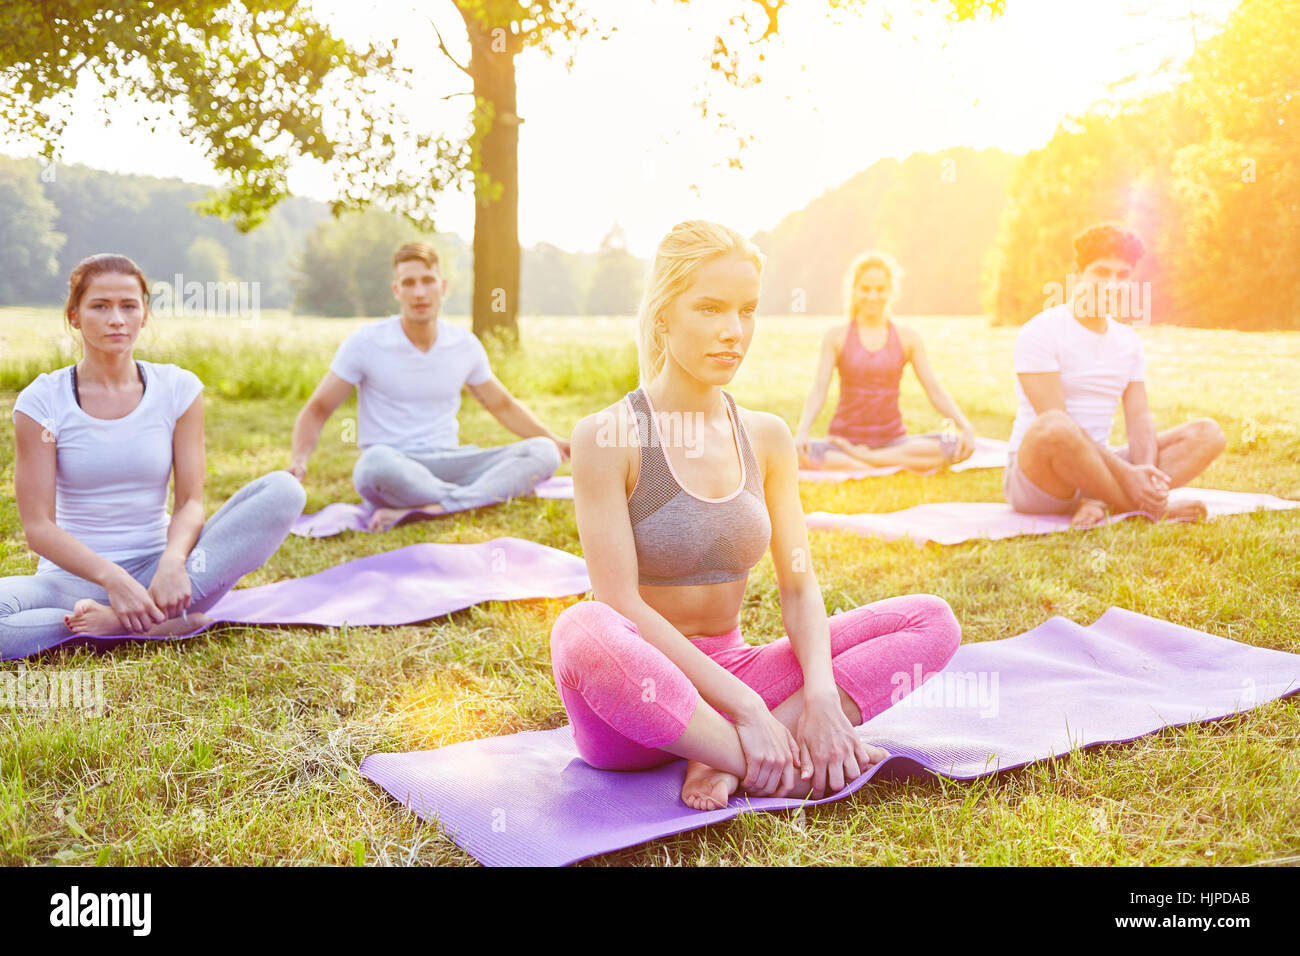 Yoga group doing relaxation exercise in summer at park Stock Photo